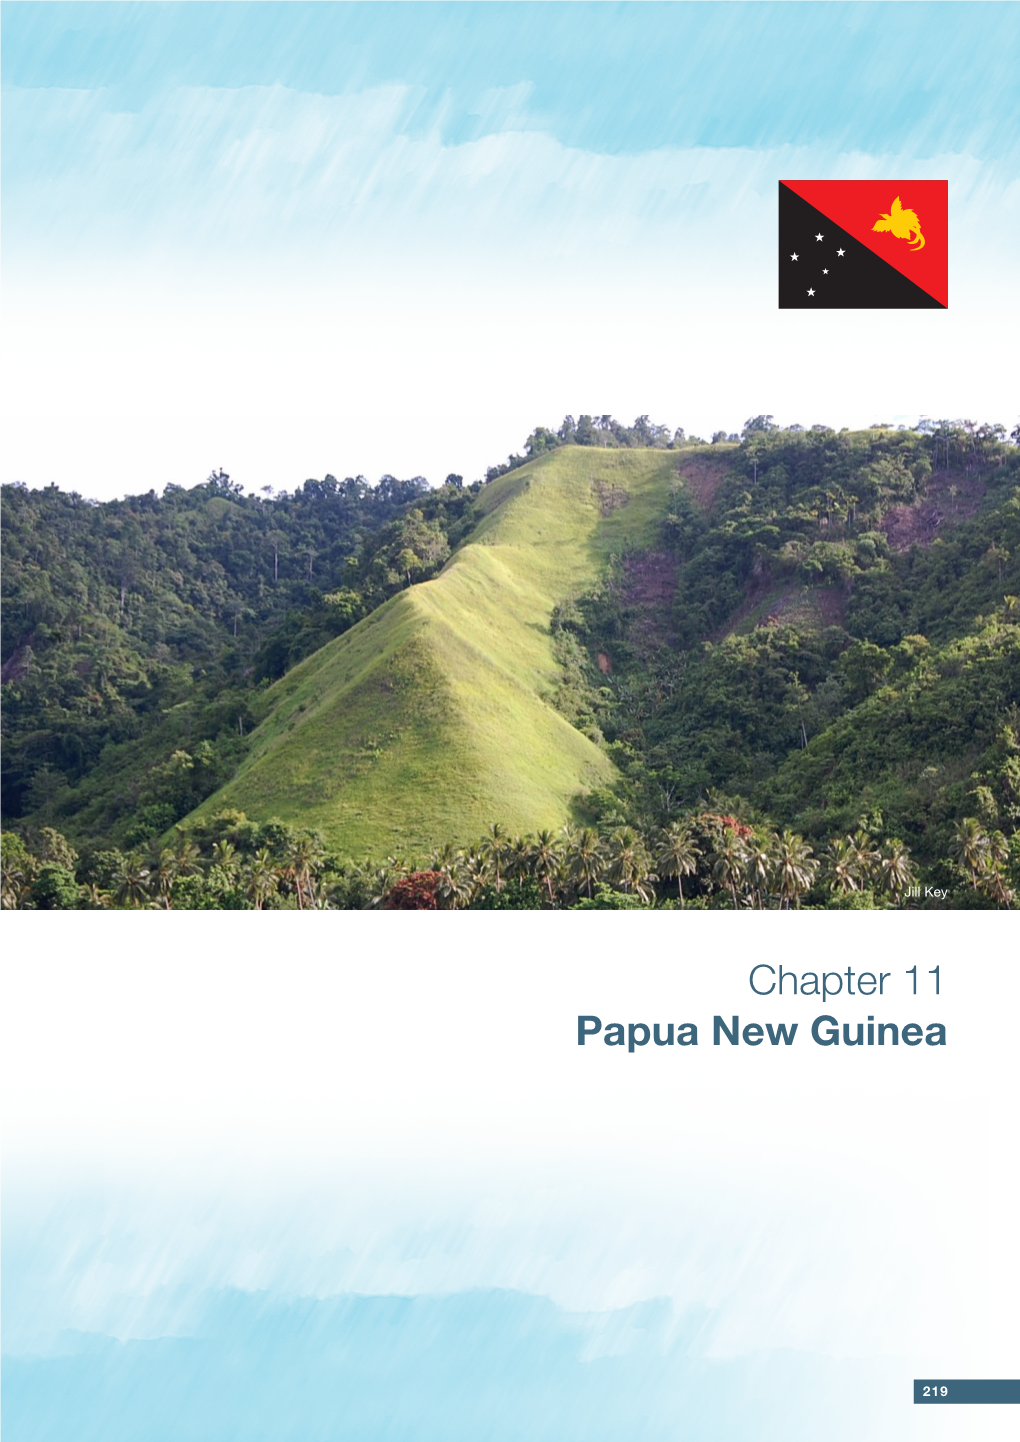 Chapter 11. Papua New Guinea